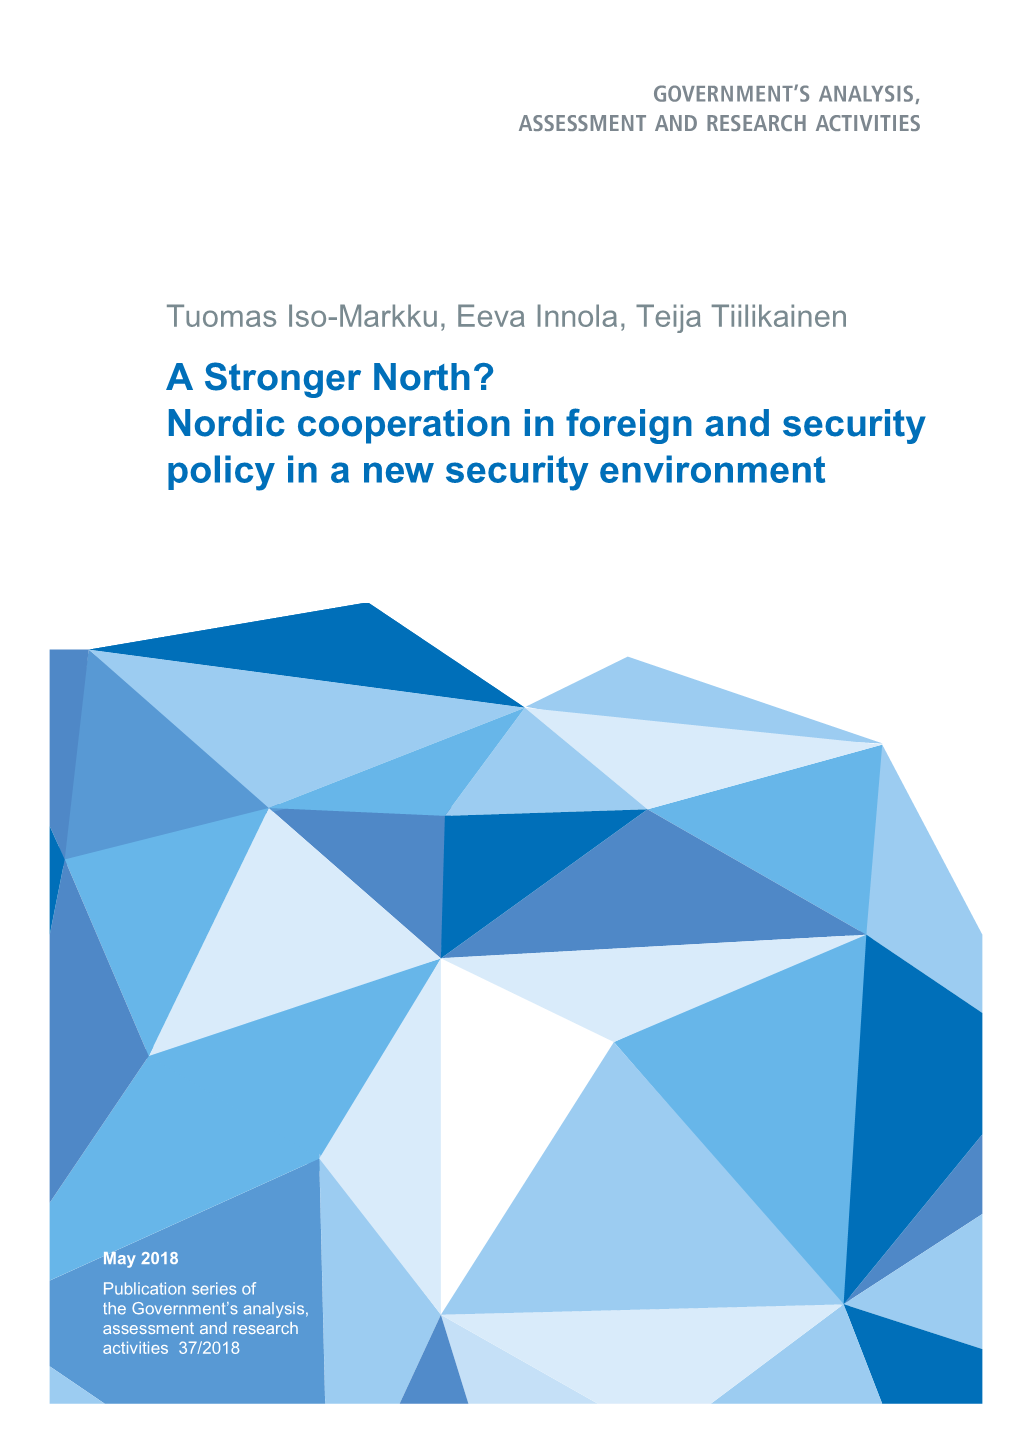 A Stronger North? Nordic Cooperation in Foreign and Security Policy in a New Security Environment